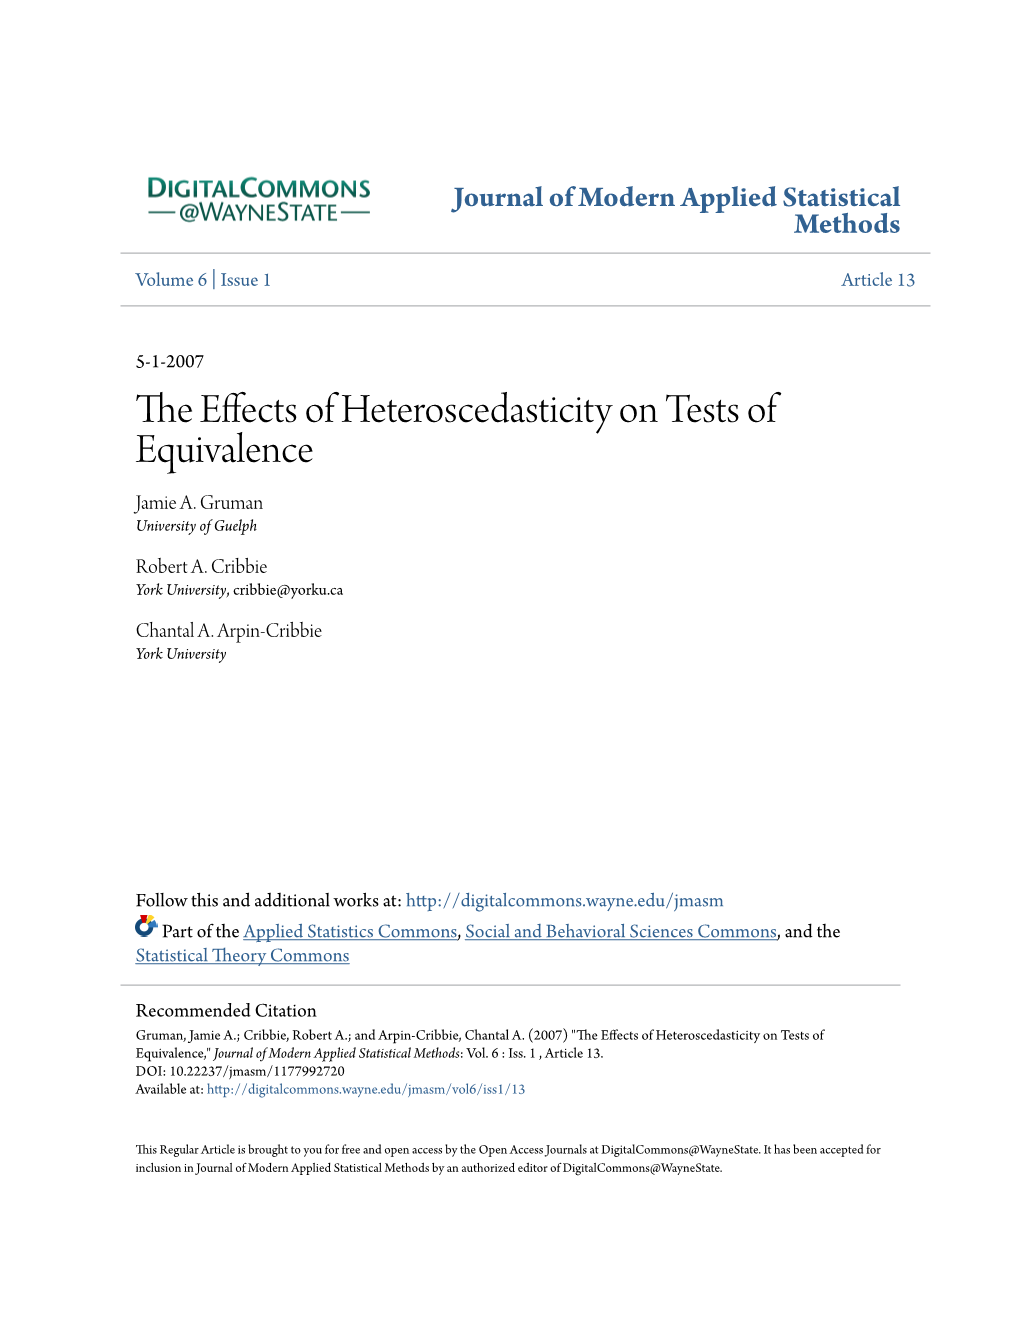 The Effects of Heteroscedasticity on Tests of Equivalence," Journal of Modern Applied Statistical Methods: Vol